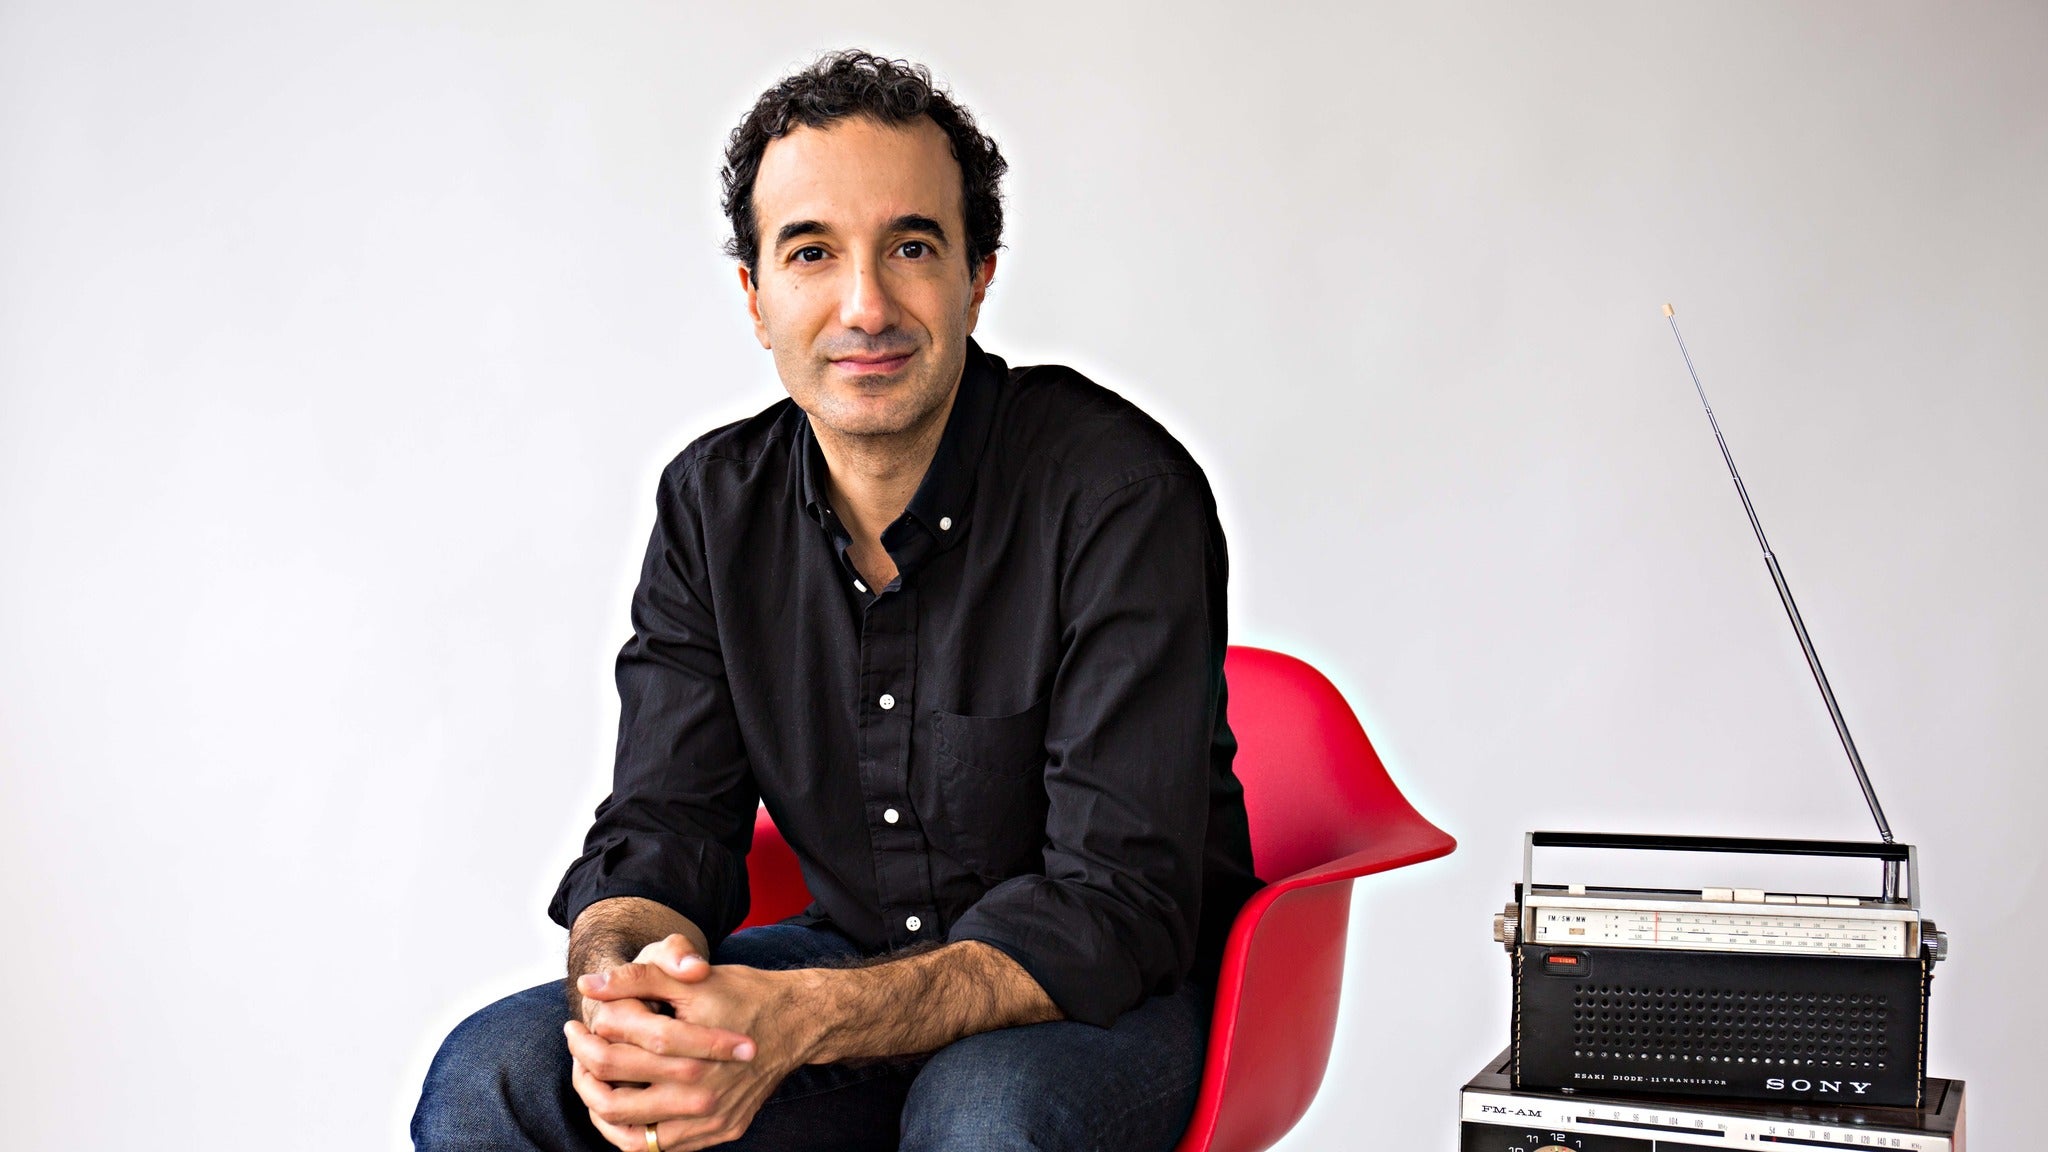 Listen Up With Jad Abumrad in Indianapolis promo photo for WFYI presale offer code